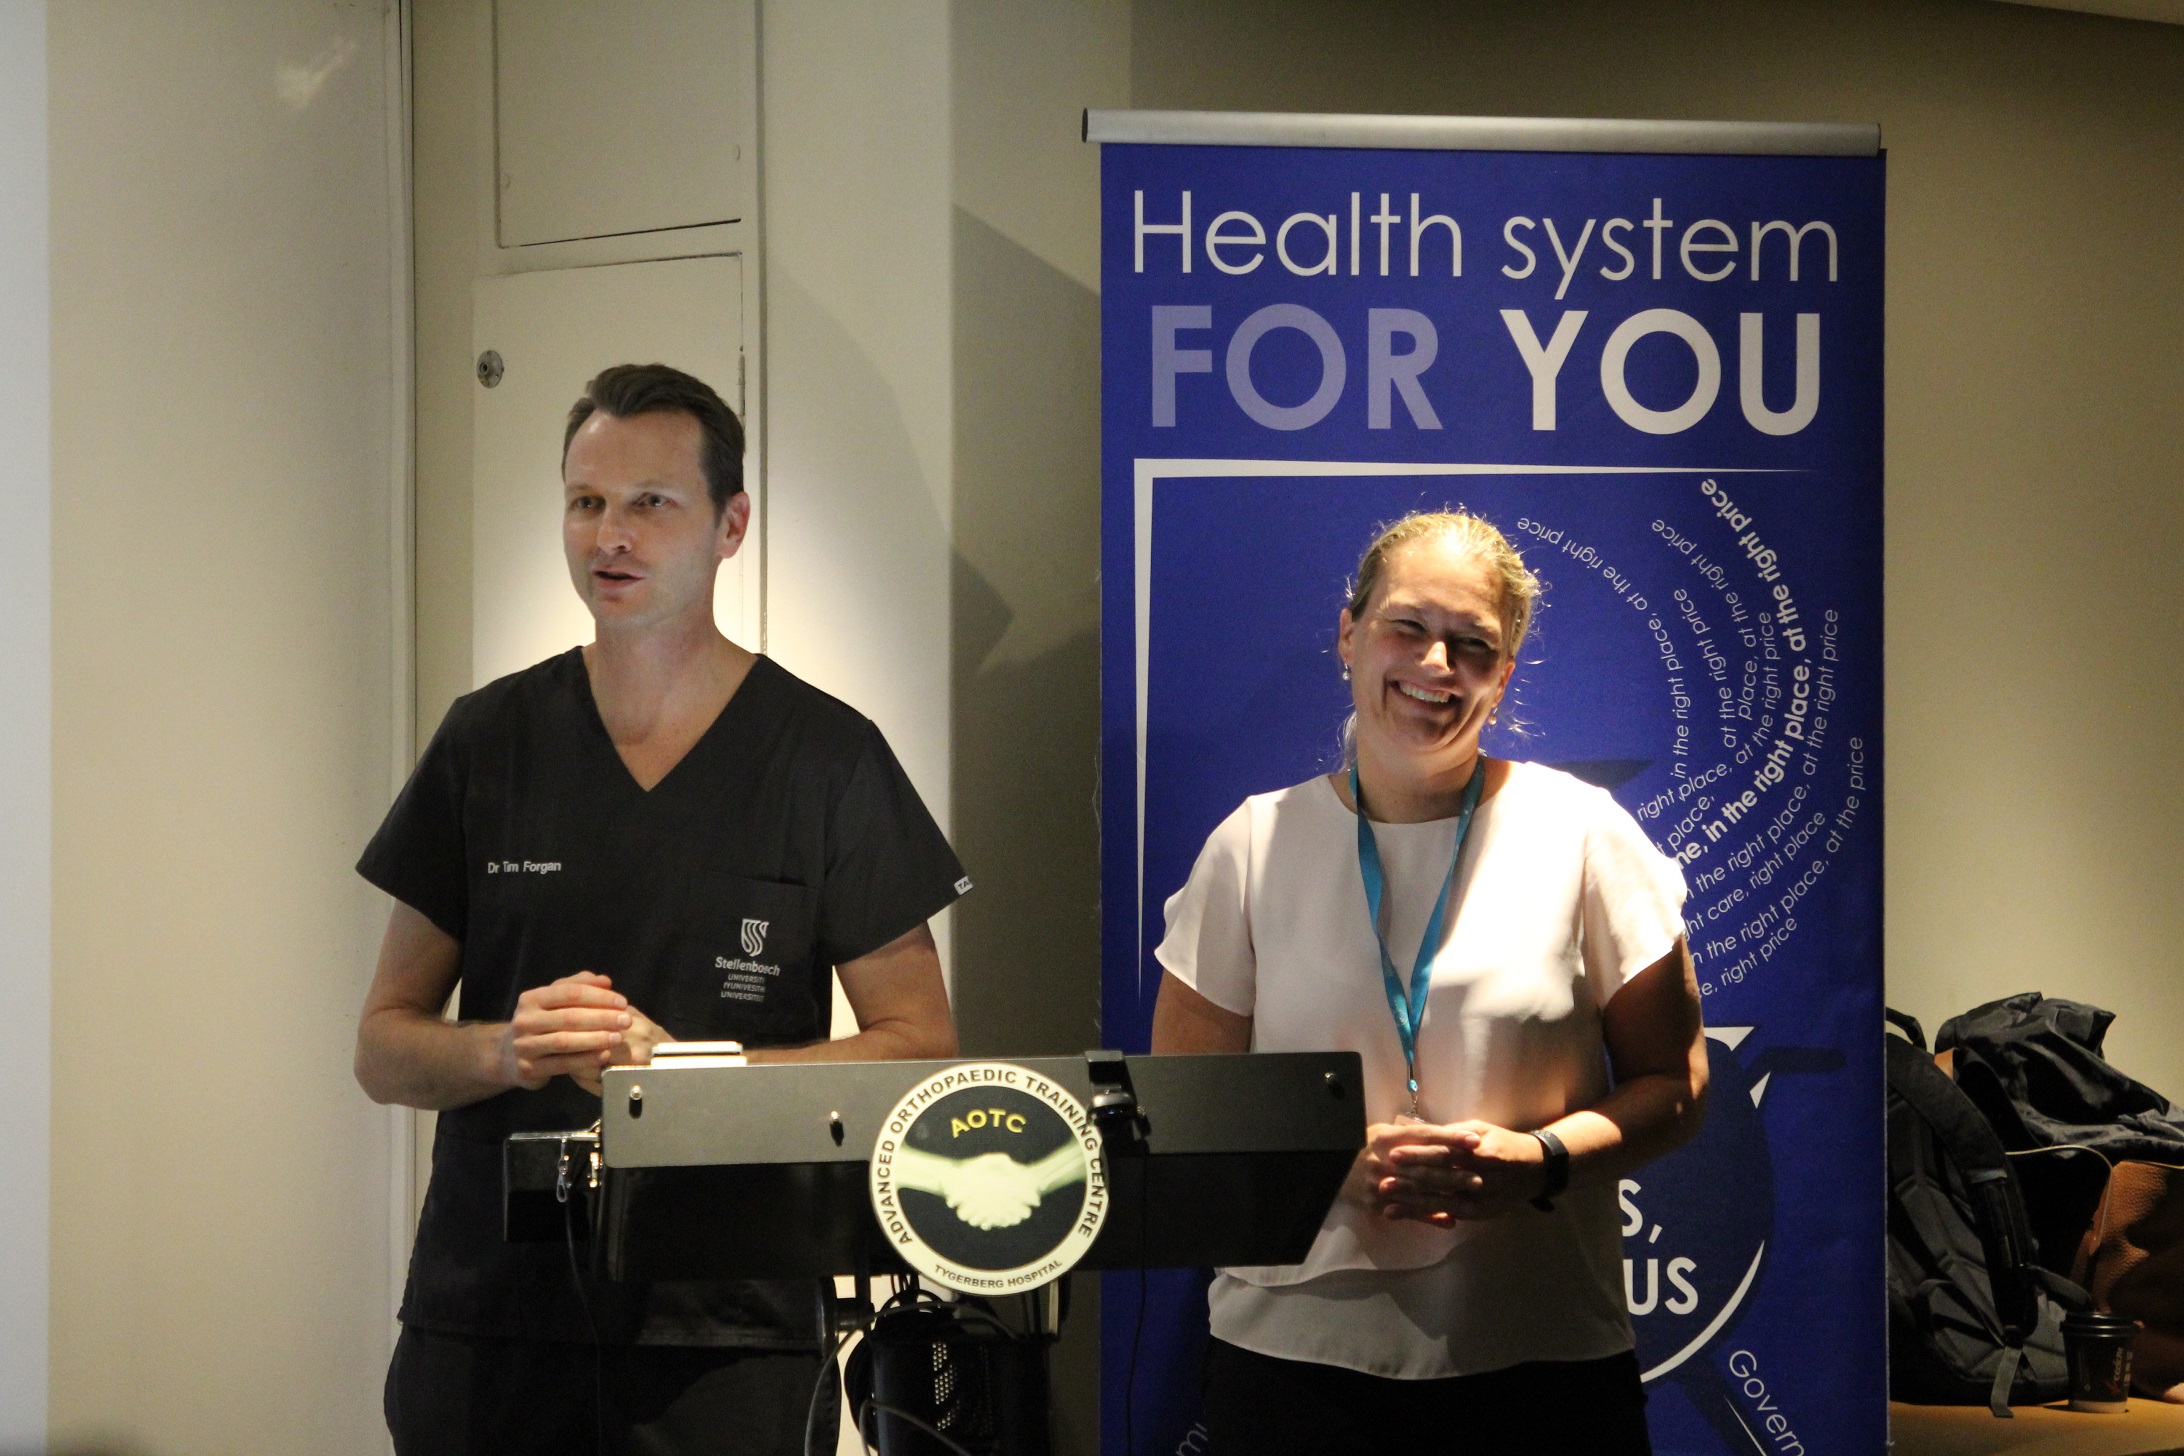 Presenting the impact of robotic surgery in the province were Dr Tom Forgan and Dr Claire Warden, from Tygerberg and Groote Schuur Hospitals respectively.